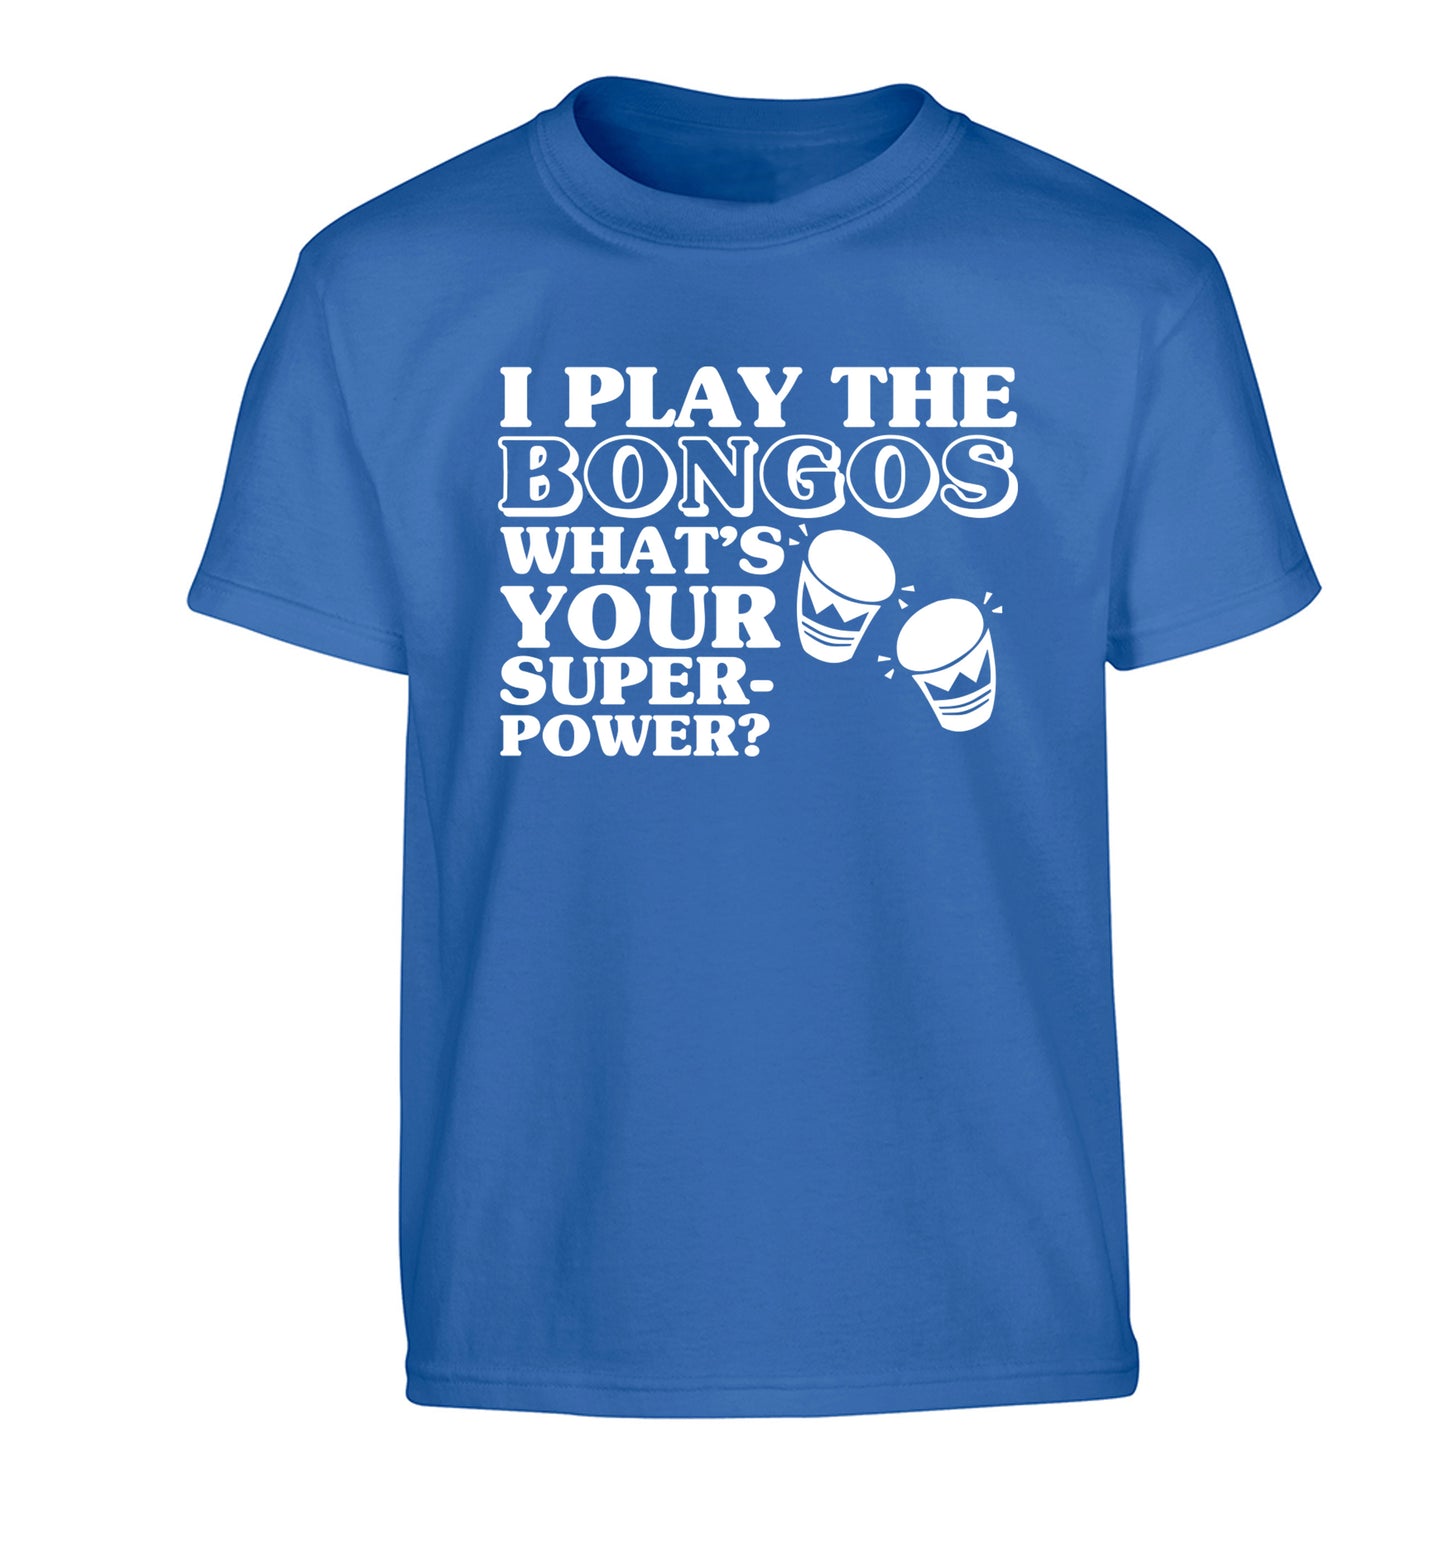 I play the bongos what's your superpower? Children's blue Tshirt 12-14 Years